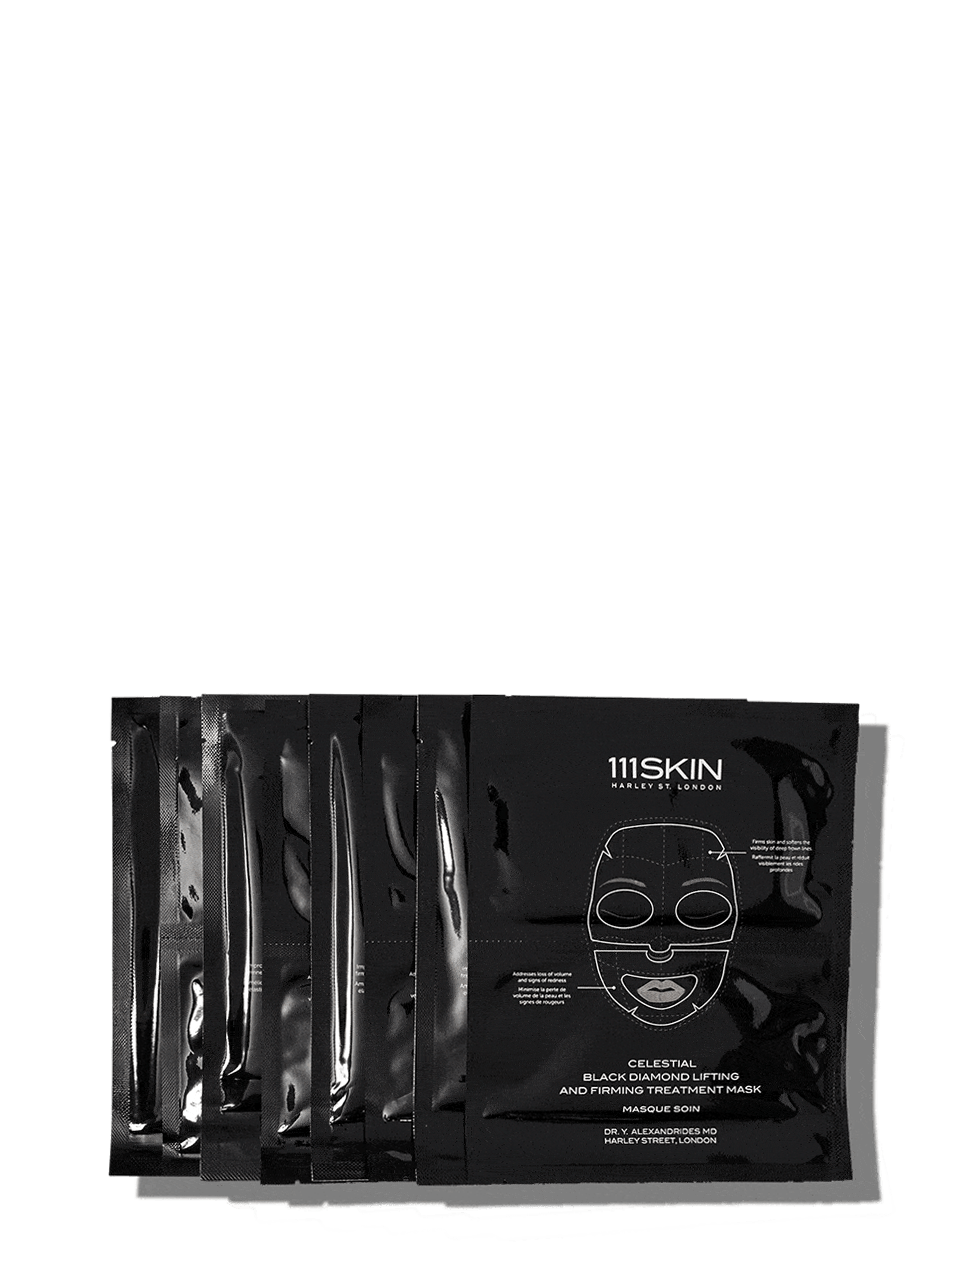 Celestial Black Diamond Lifting and Firming Masks for Face or Neck SKINCARE 111Skin Face 5 Pack 